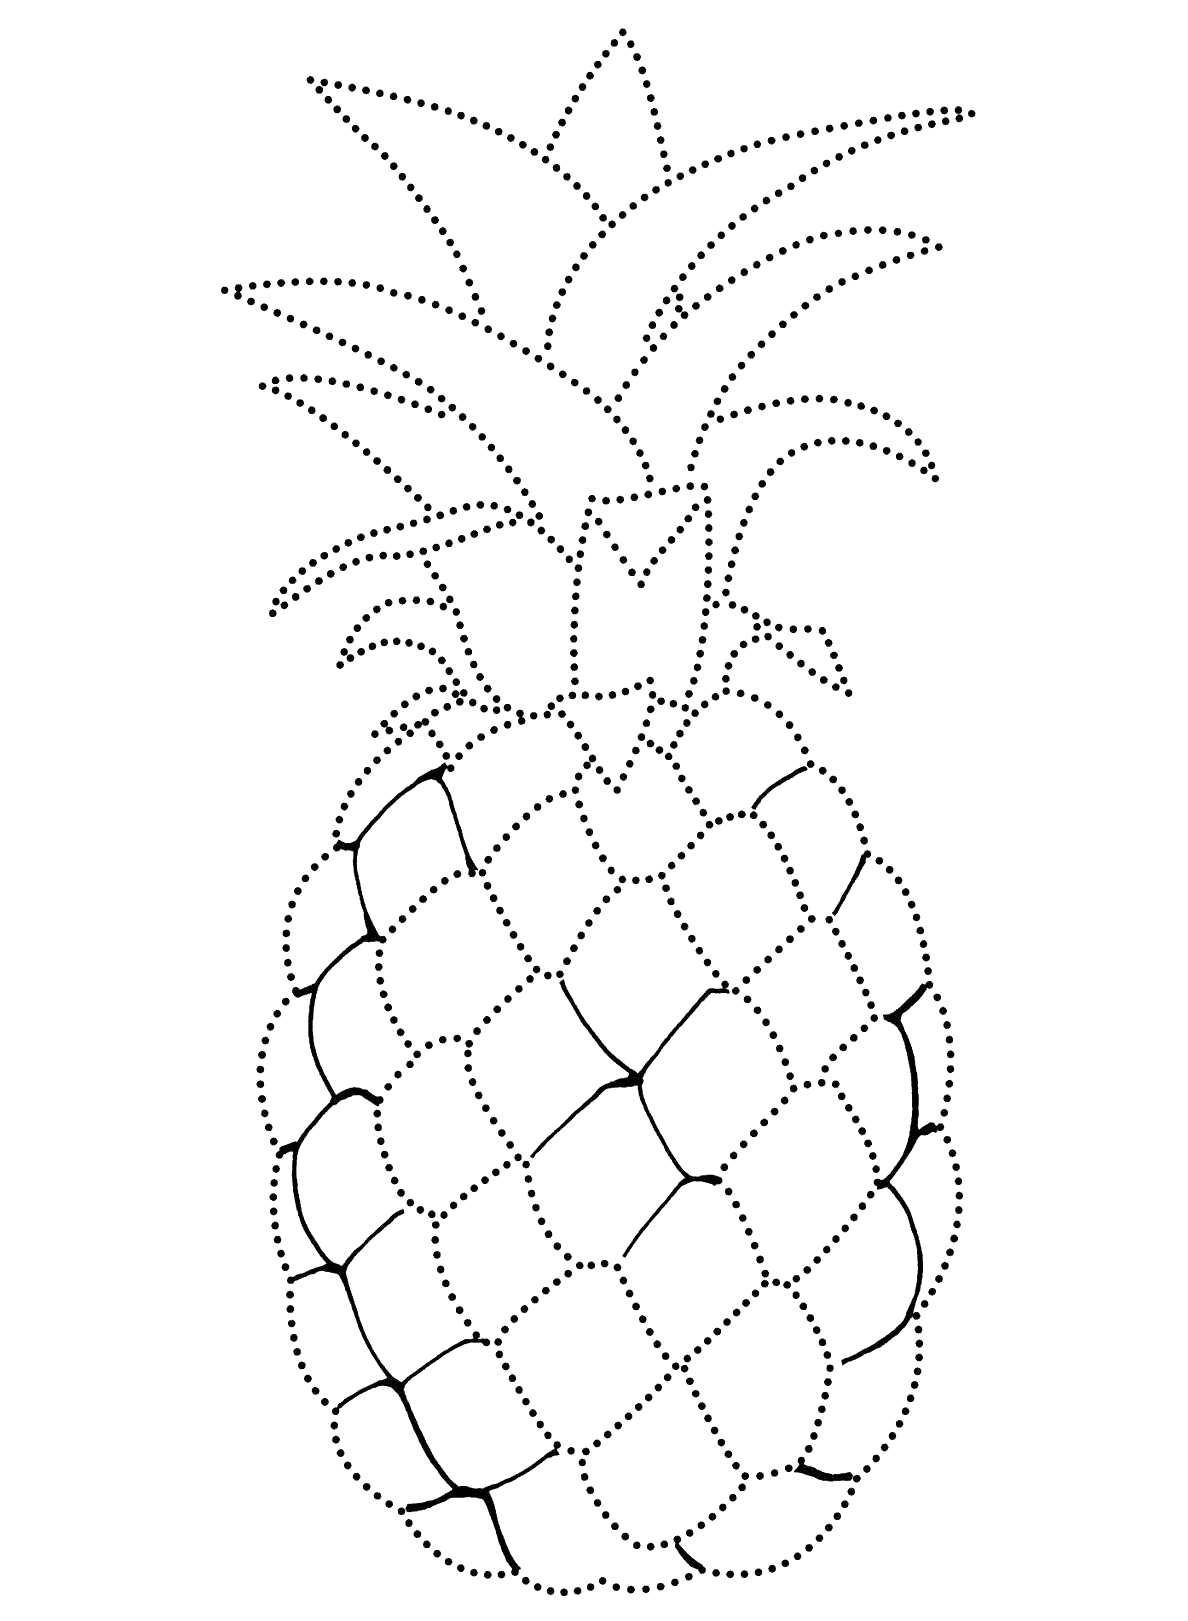 Coloring page - Pineapple